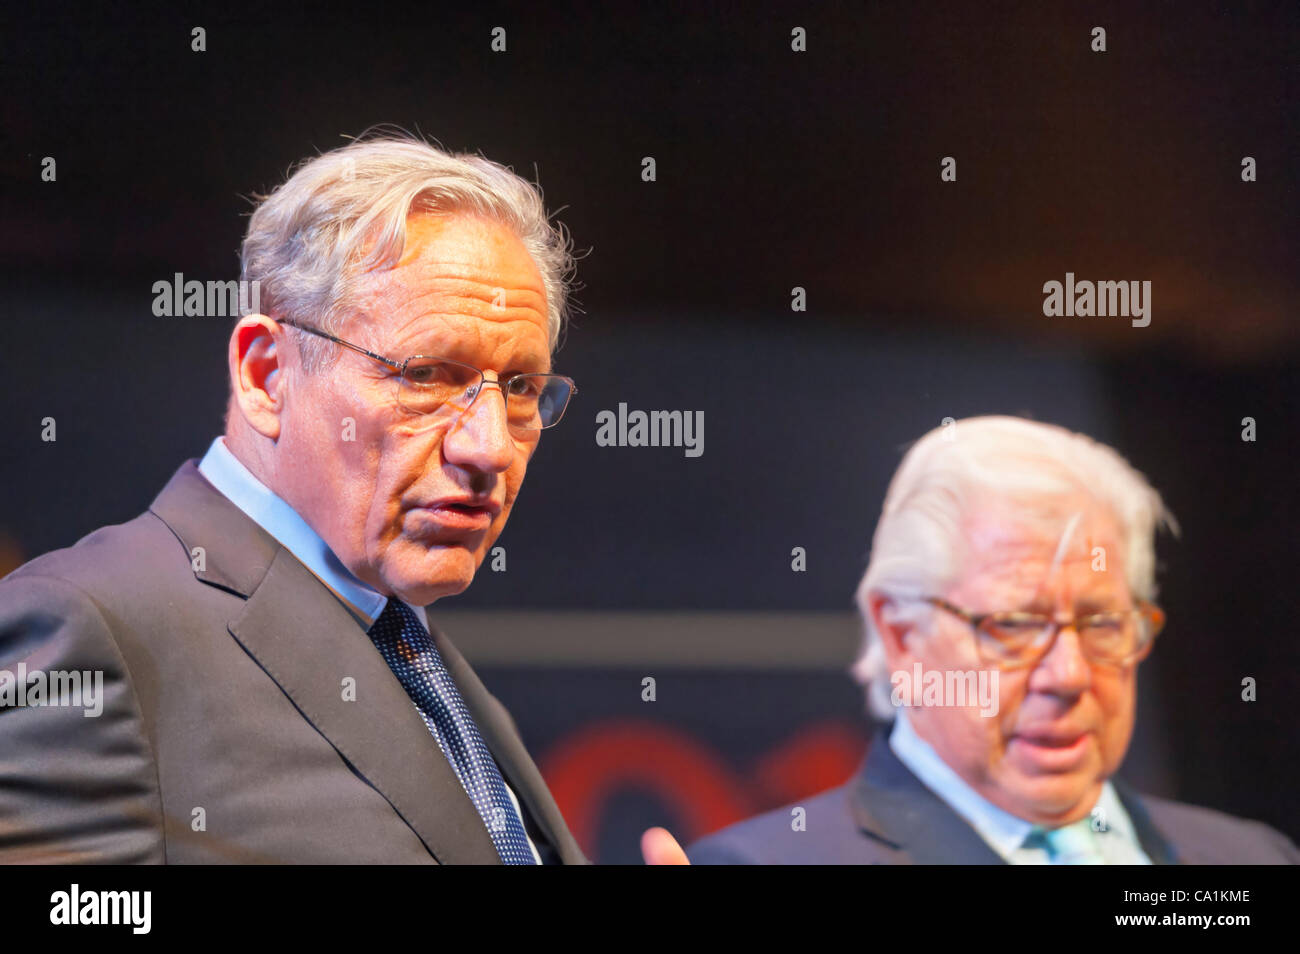 Journalists Bob Woodward (left) and Carl Bernstein (right) speak on 40th Anniversary of Watergate, on Tuesday, March 20, 2012, at Hofstra University, Hempstead, New York, USA. This lecture was about the Watergate political scandal, which lead to resignation of President Richard Nixon, and is one of Stock Photo